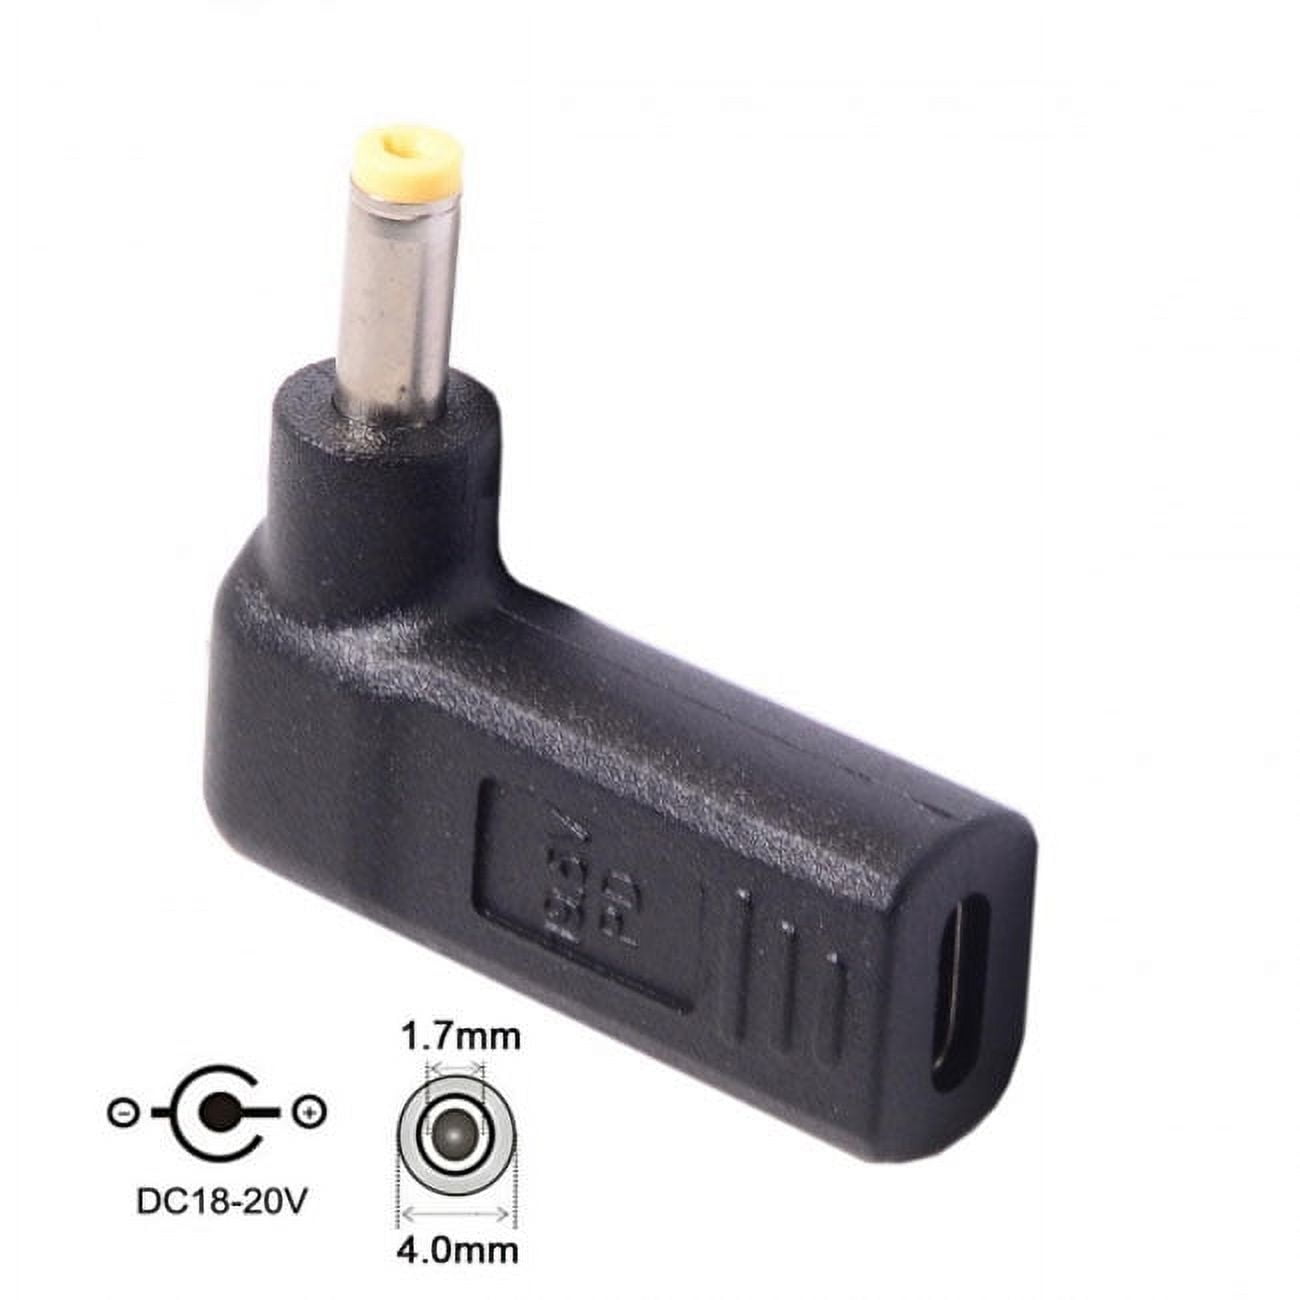 VOSS Power Barrel Port To USB DC Connector 1M 2.1mm Jack Cable 5V